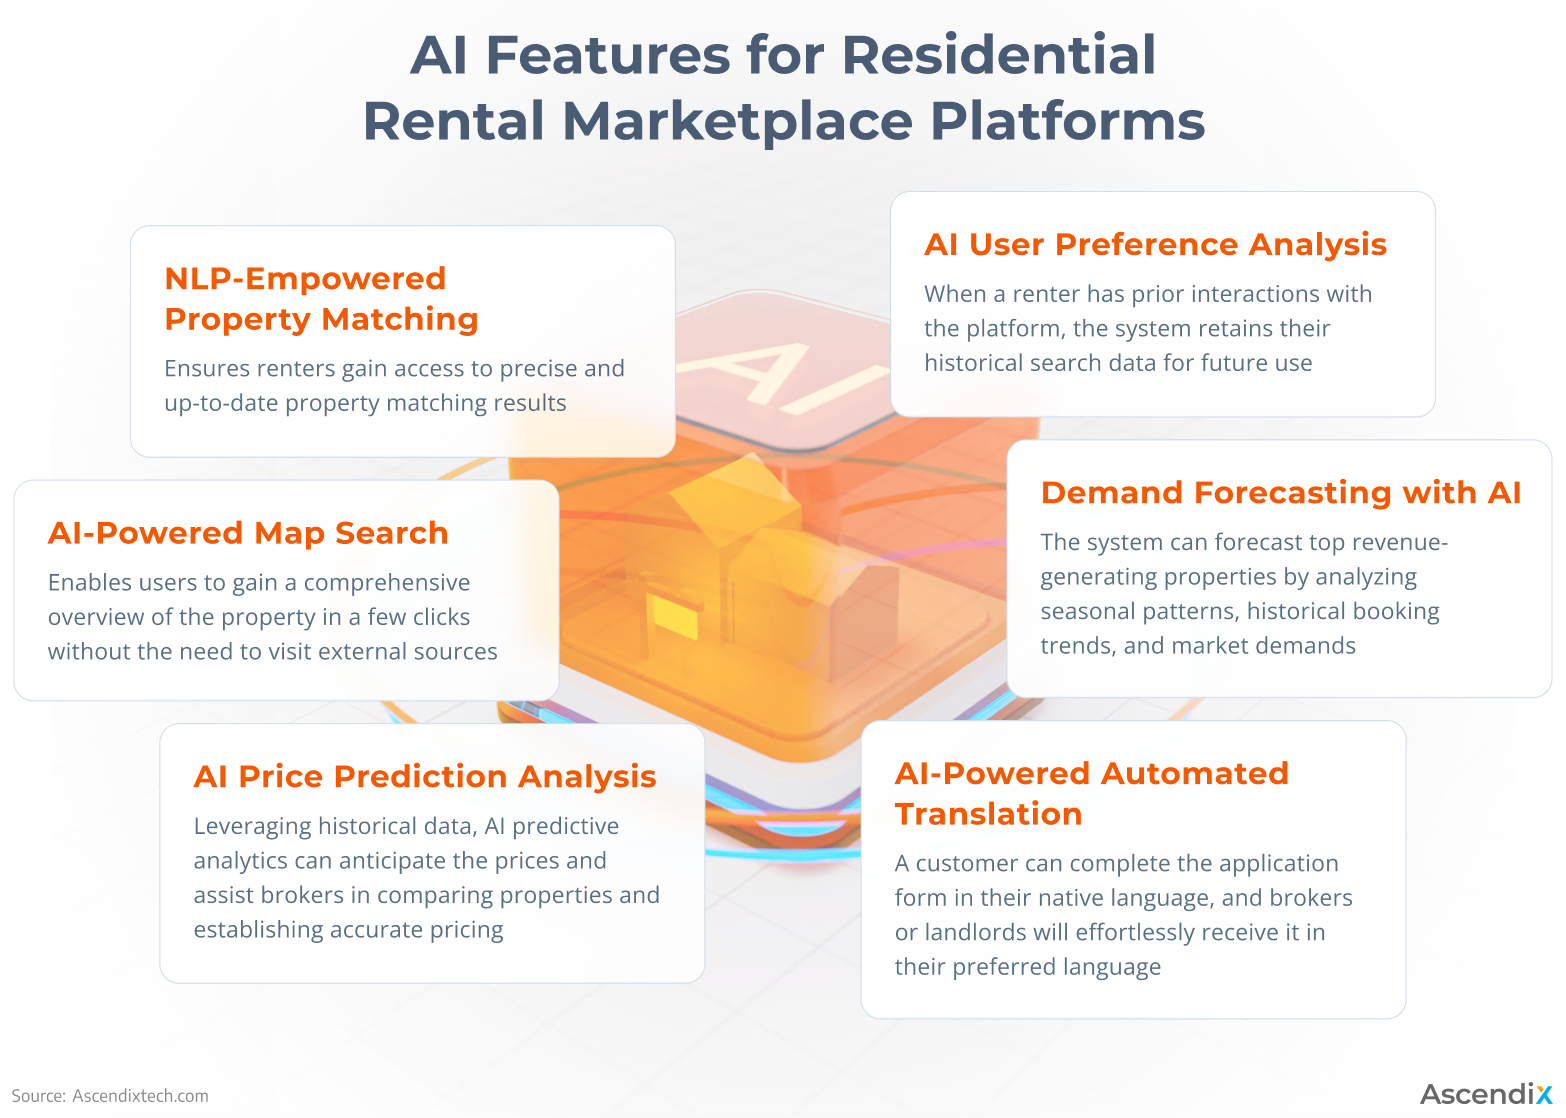 AI Features for Residential Rental Marketplace Platforms